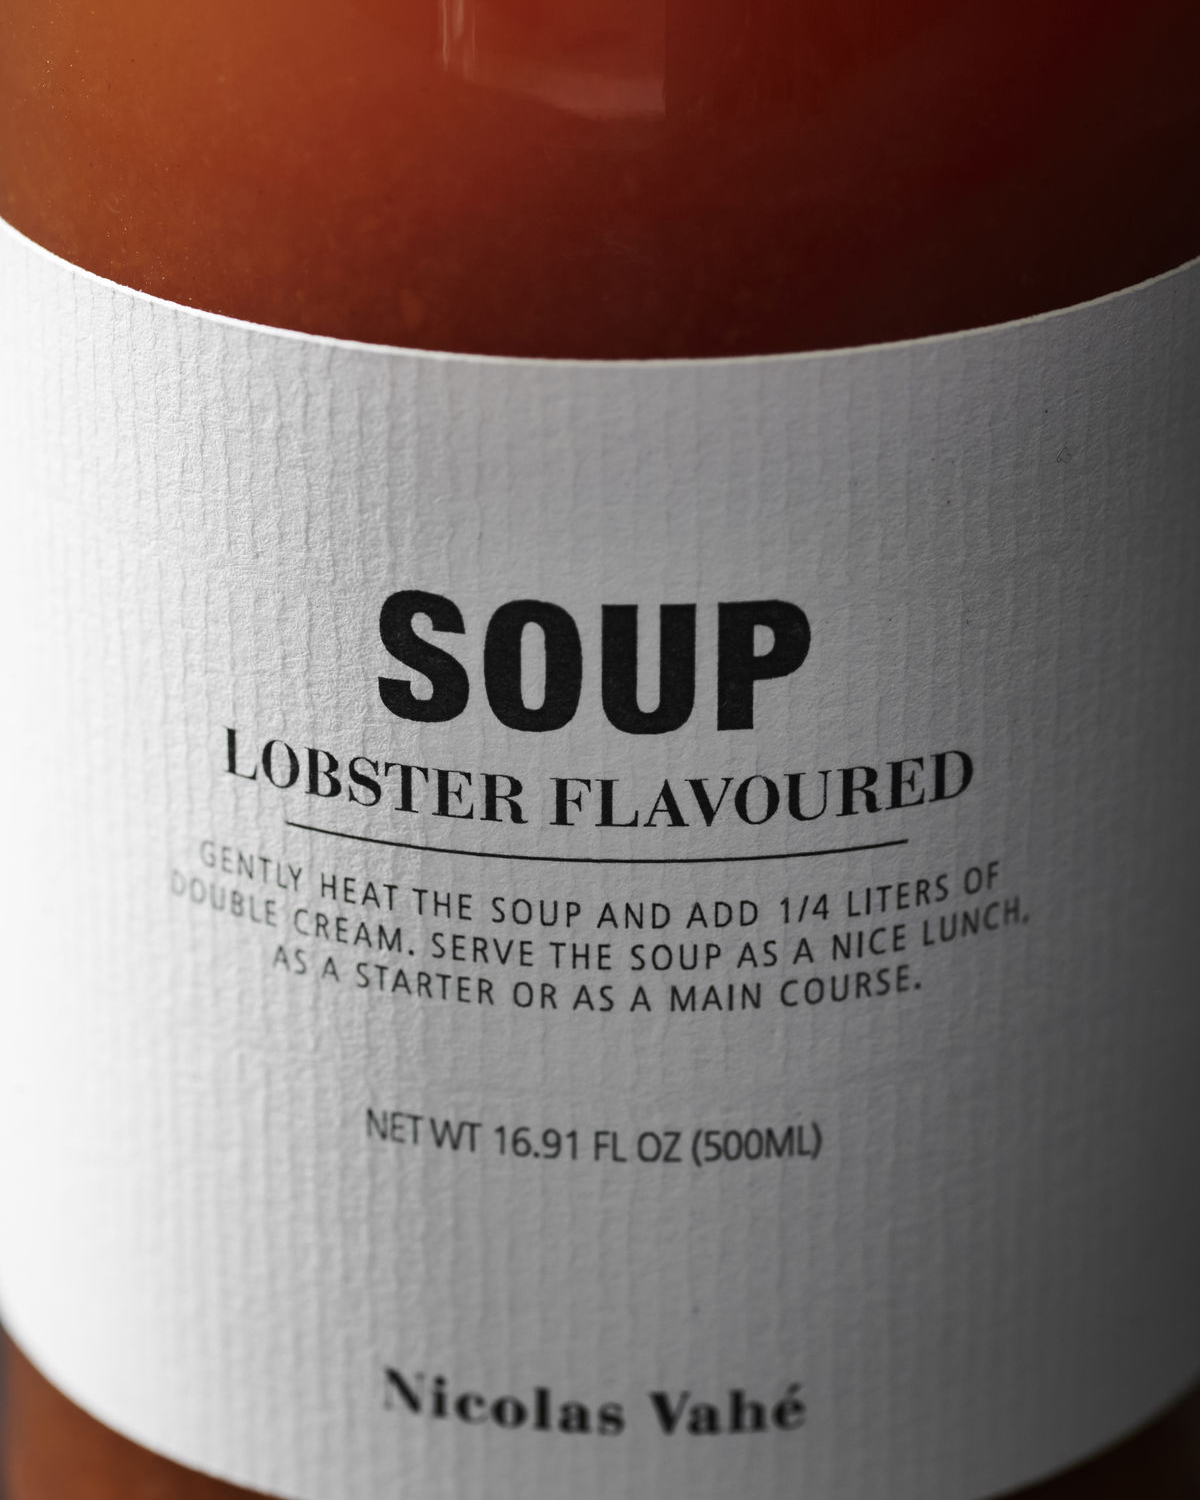 Lobster flavored soup, 500 ml.